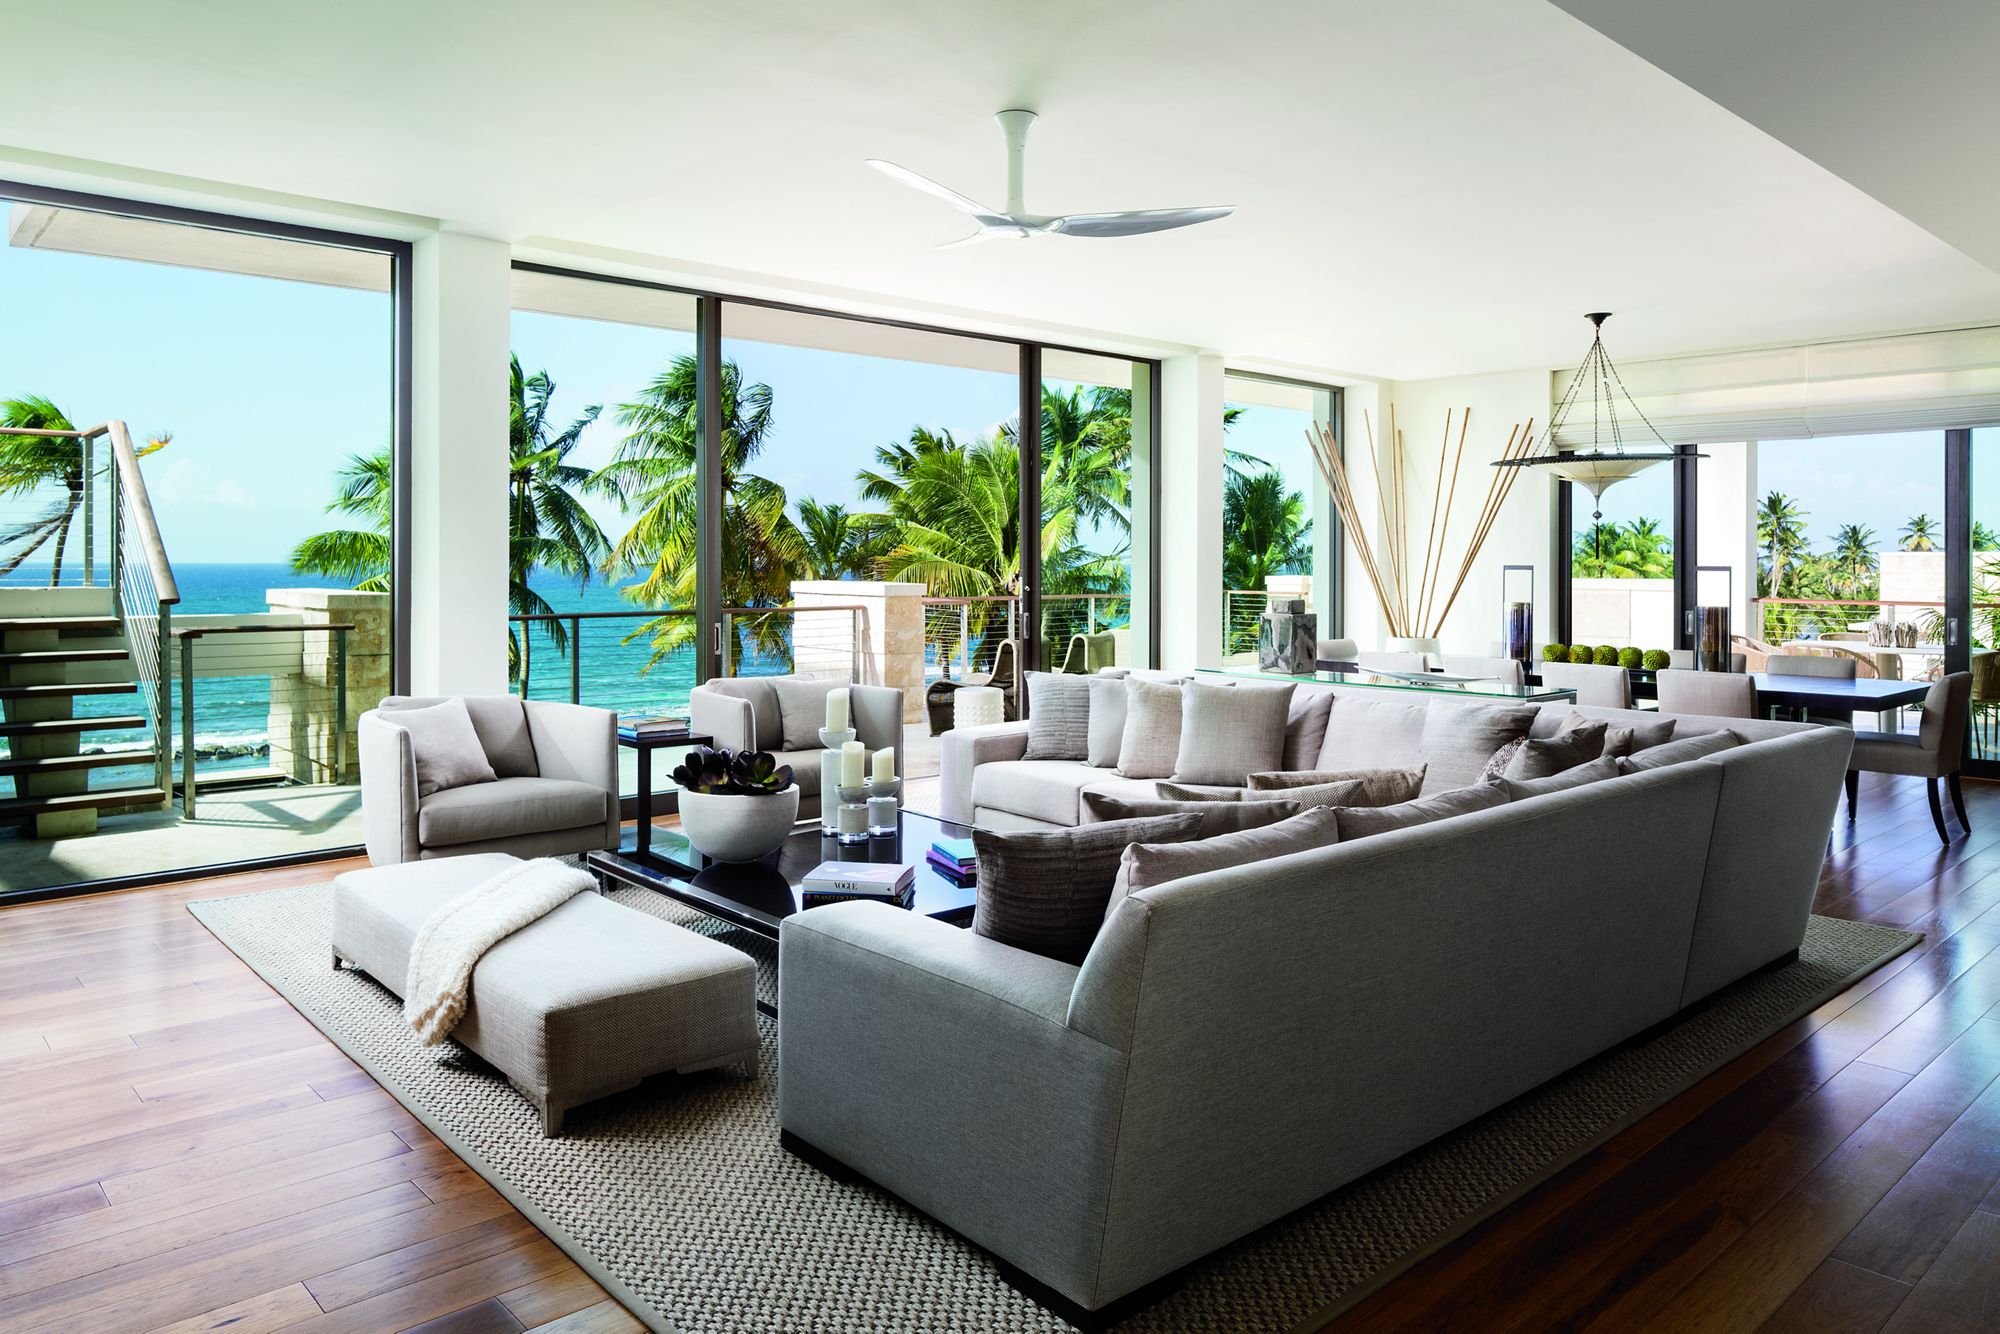 Wood floors, gracious furnishings and ocean views in the Four Bedroom Penthouse living room